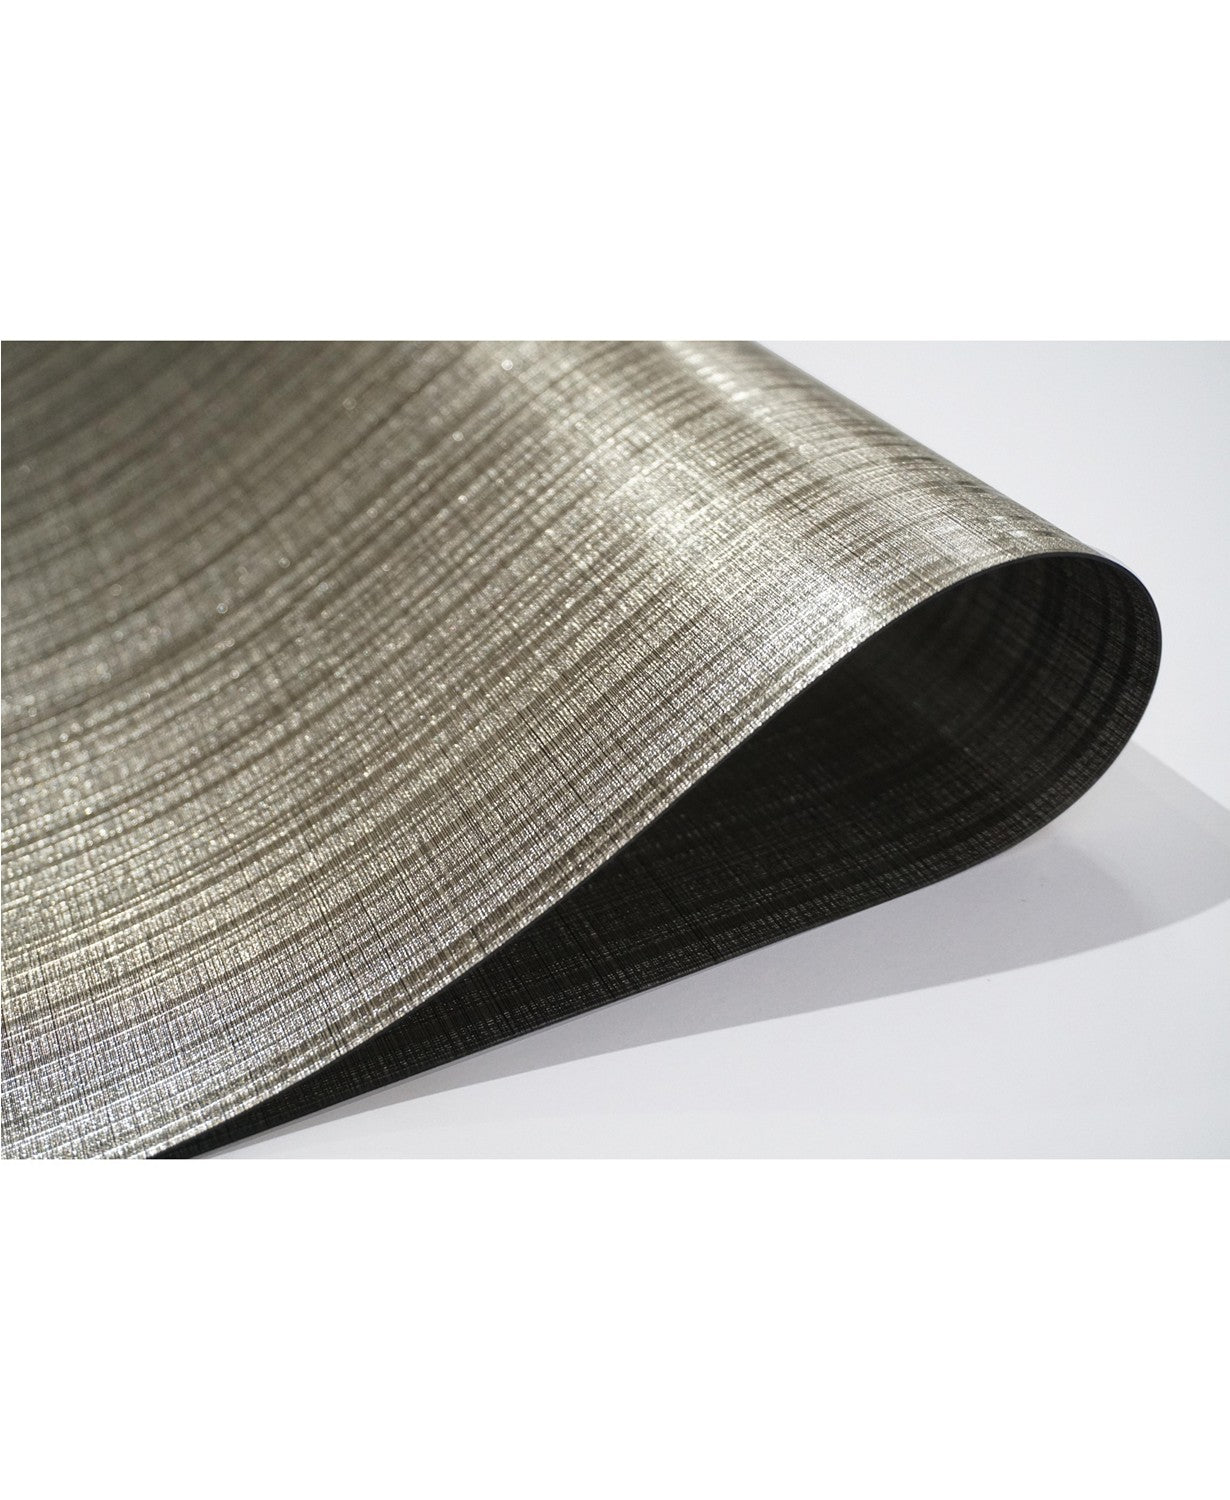 Dainty Home Reversible Emery Smooth Metallic Stripes 12" x 18" Placemats - Set of 4